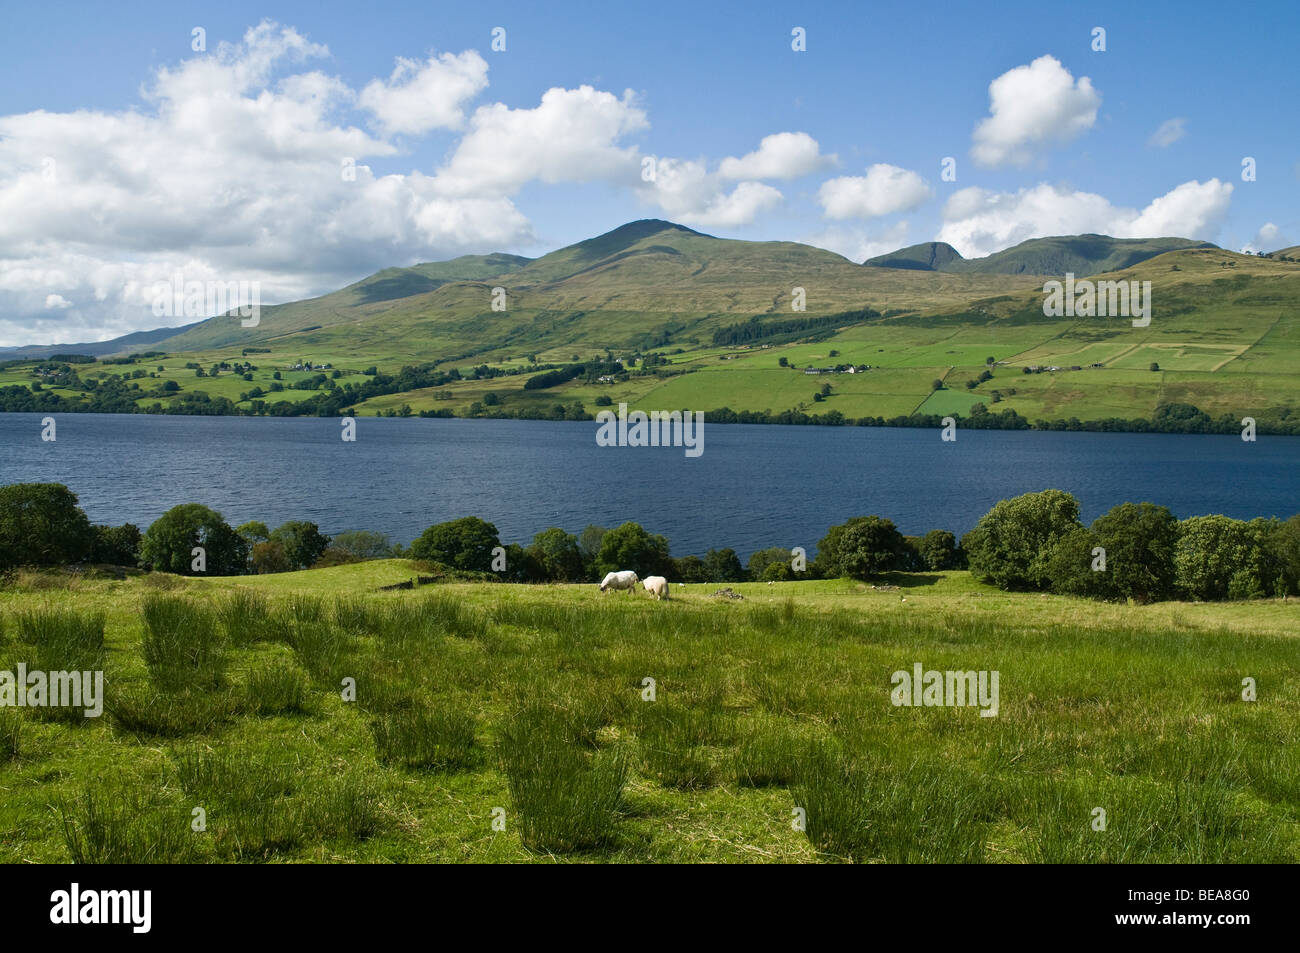 dh Ben Lawers Mountain range LOCH TAY PERTHSHIRE Sheep countryside landscape summer scottish munro mountains country scene scotland highlands Stock Photo